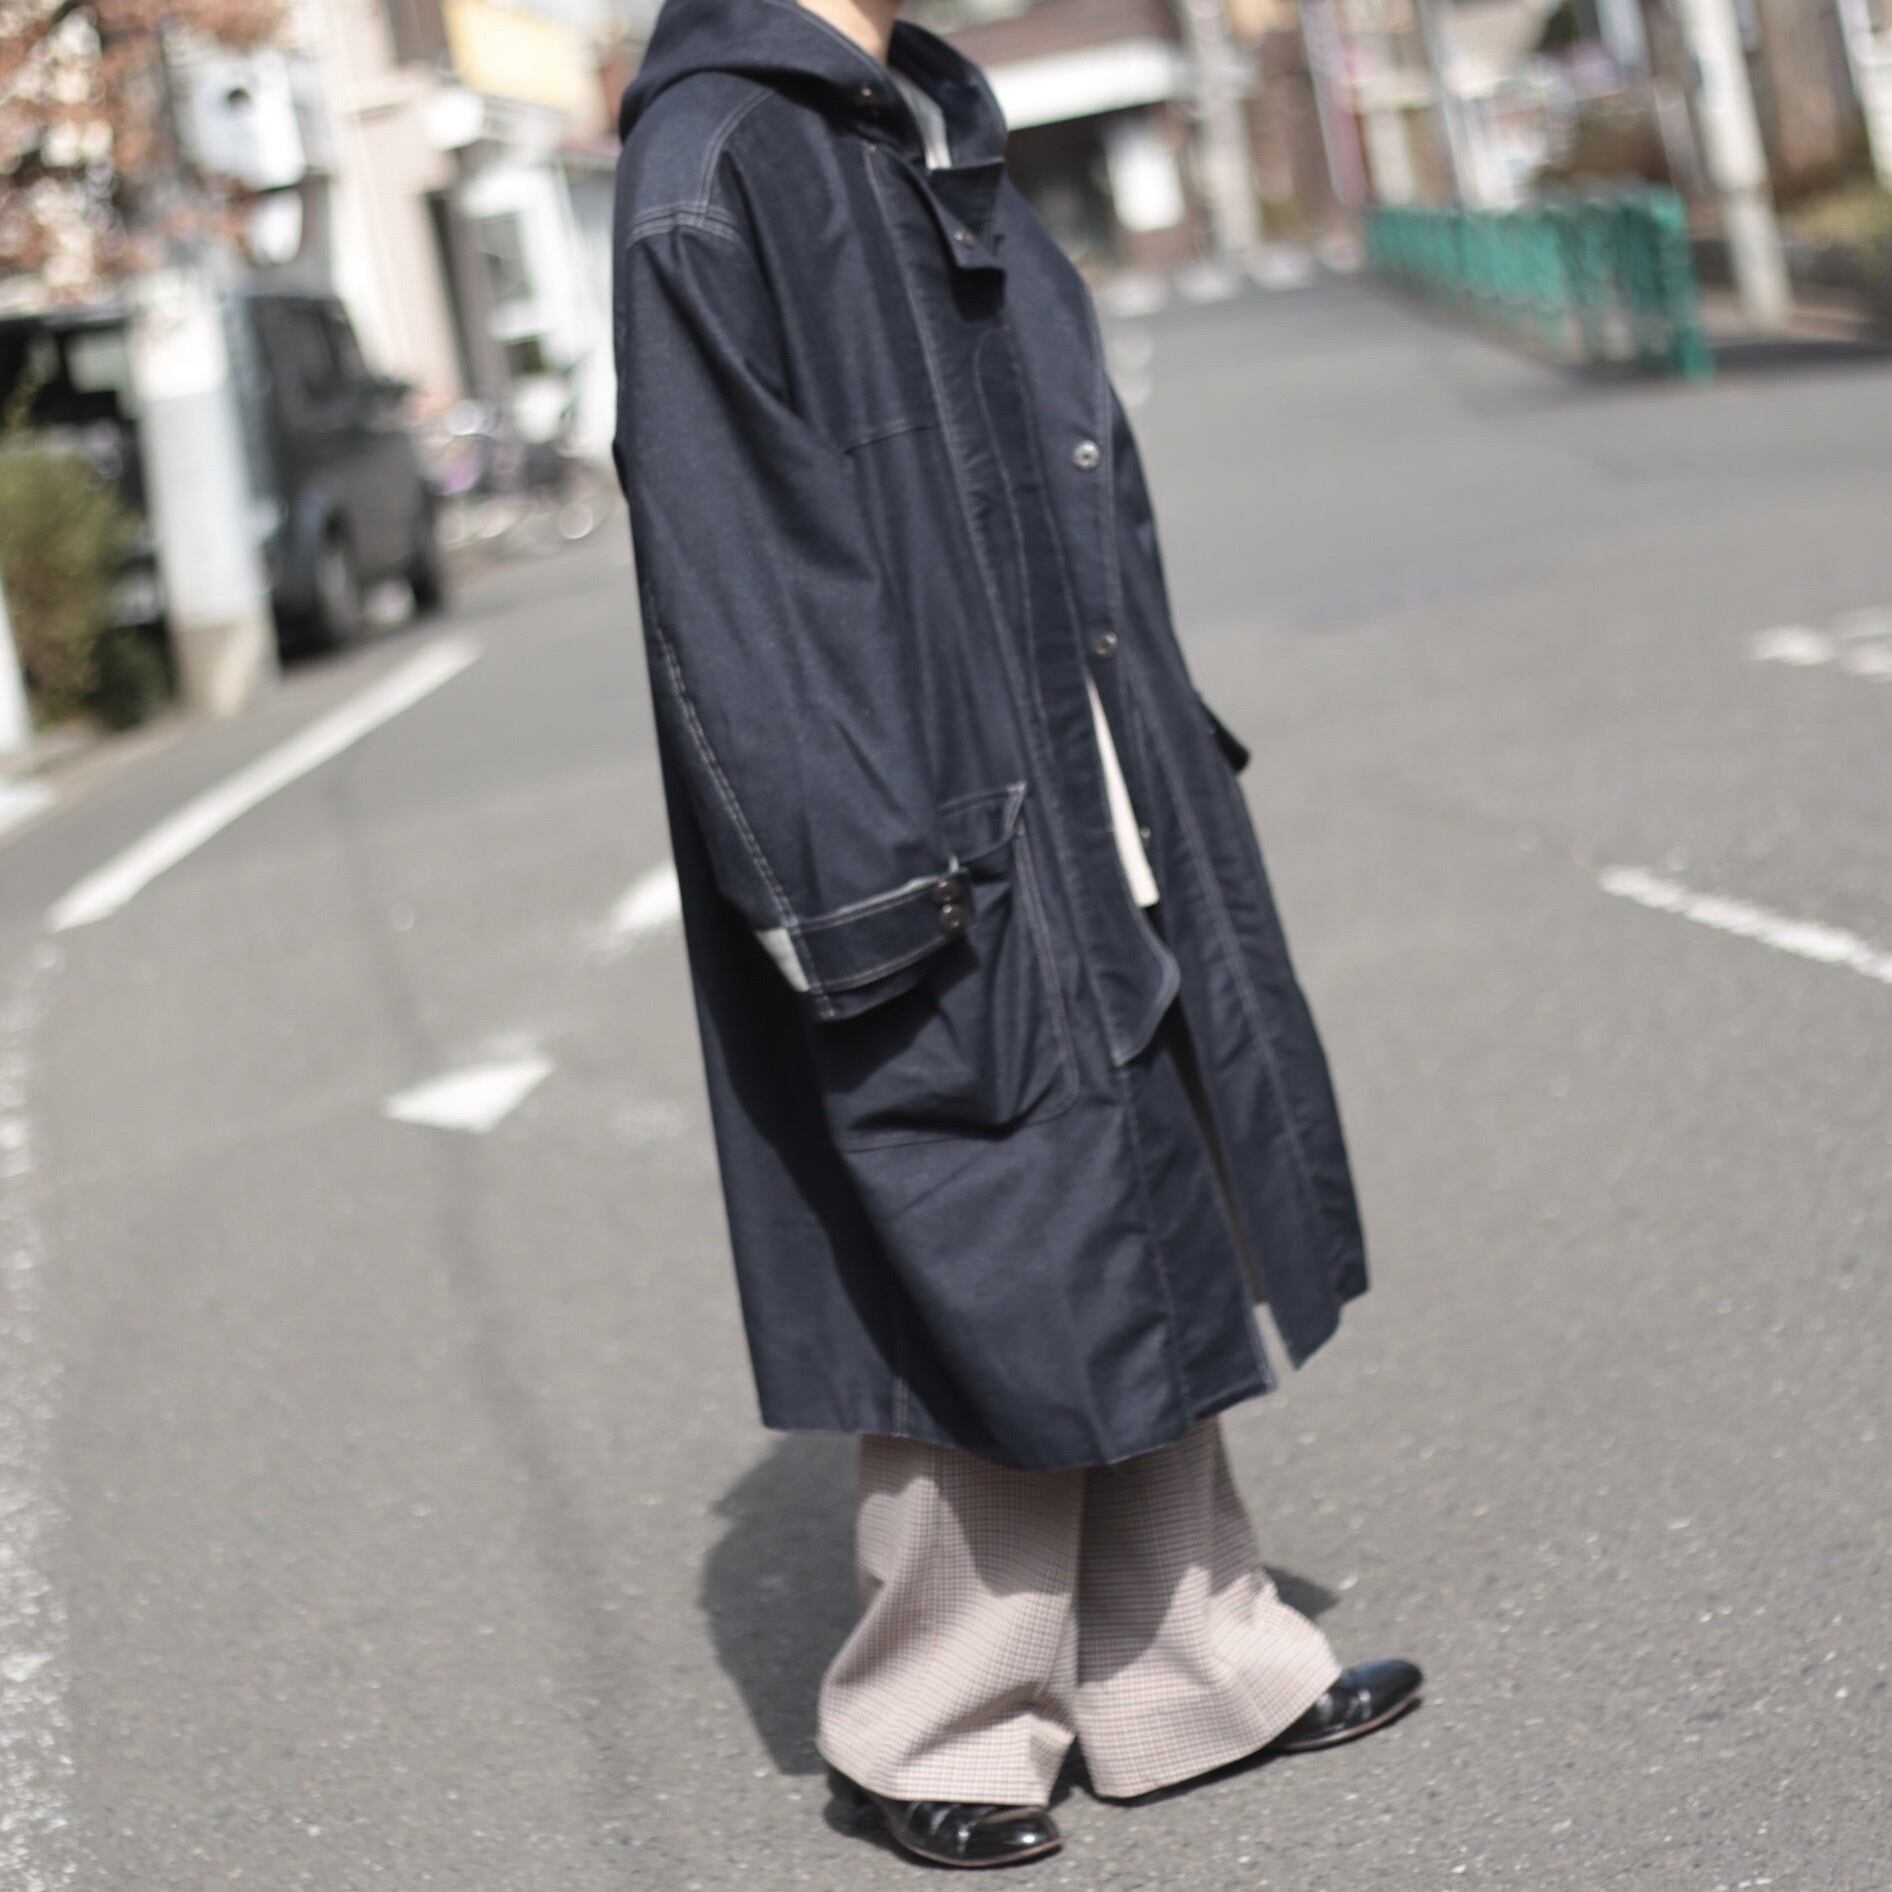 NIGEL CABOURN フーデットファイヤーマンコート 【CO-0495】 | cv powered by BASE